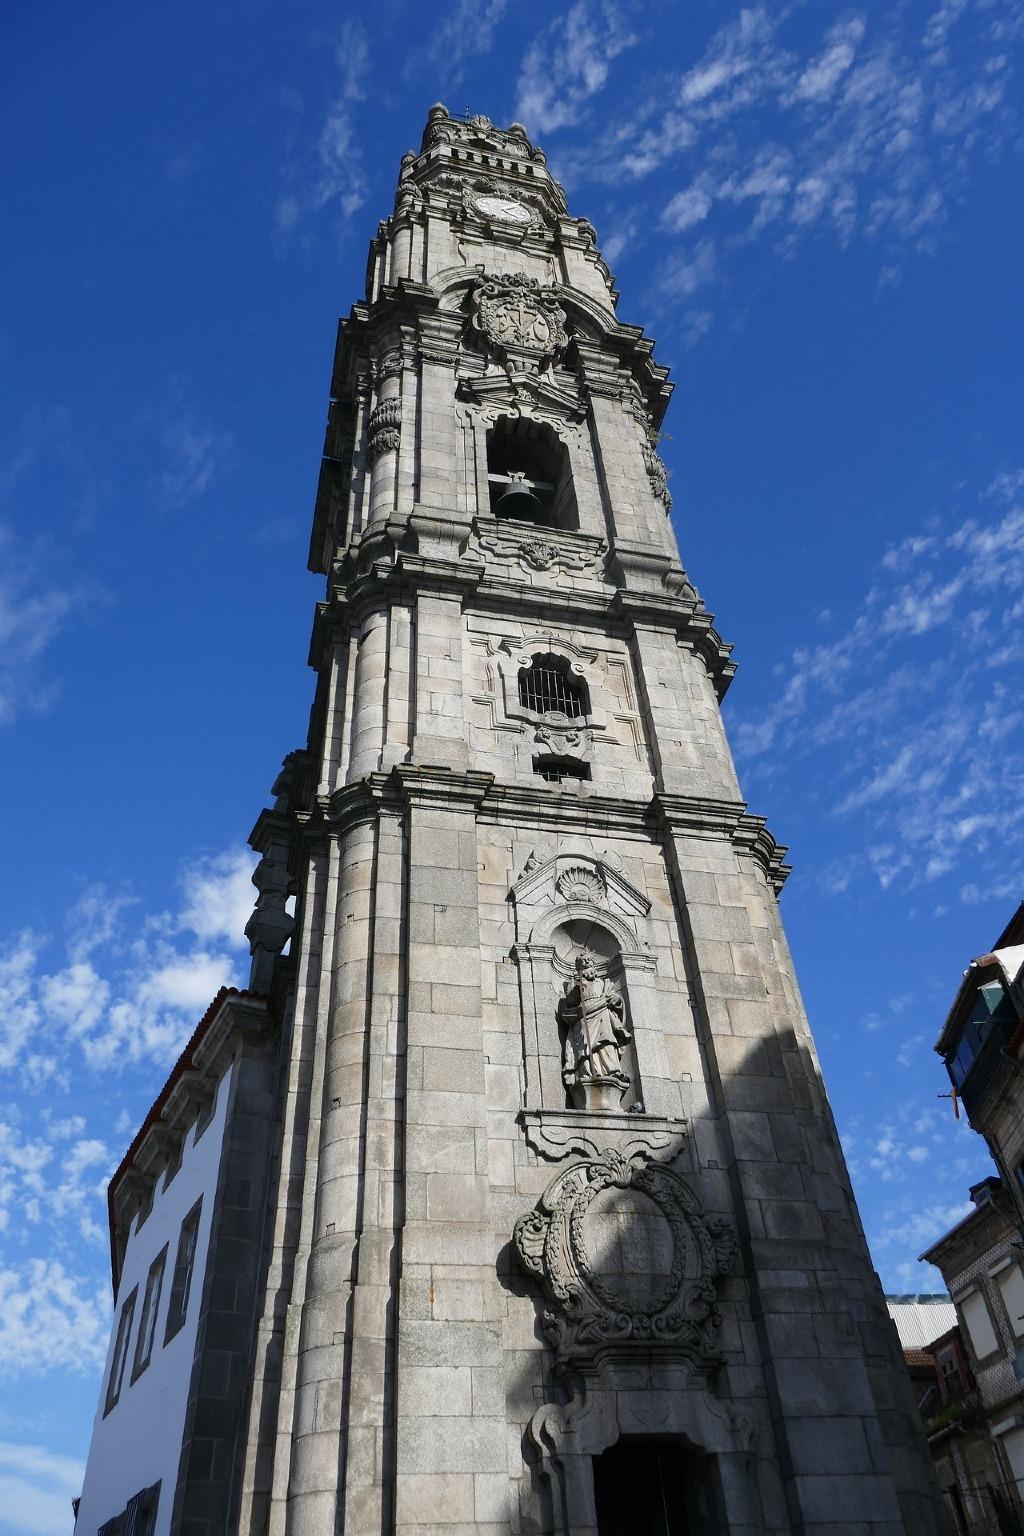 Clerigos Tower, an iconic landmark in Porto, Portugal, a perspective from the bottom of the monument